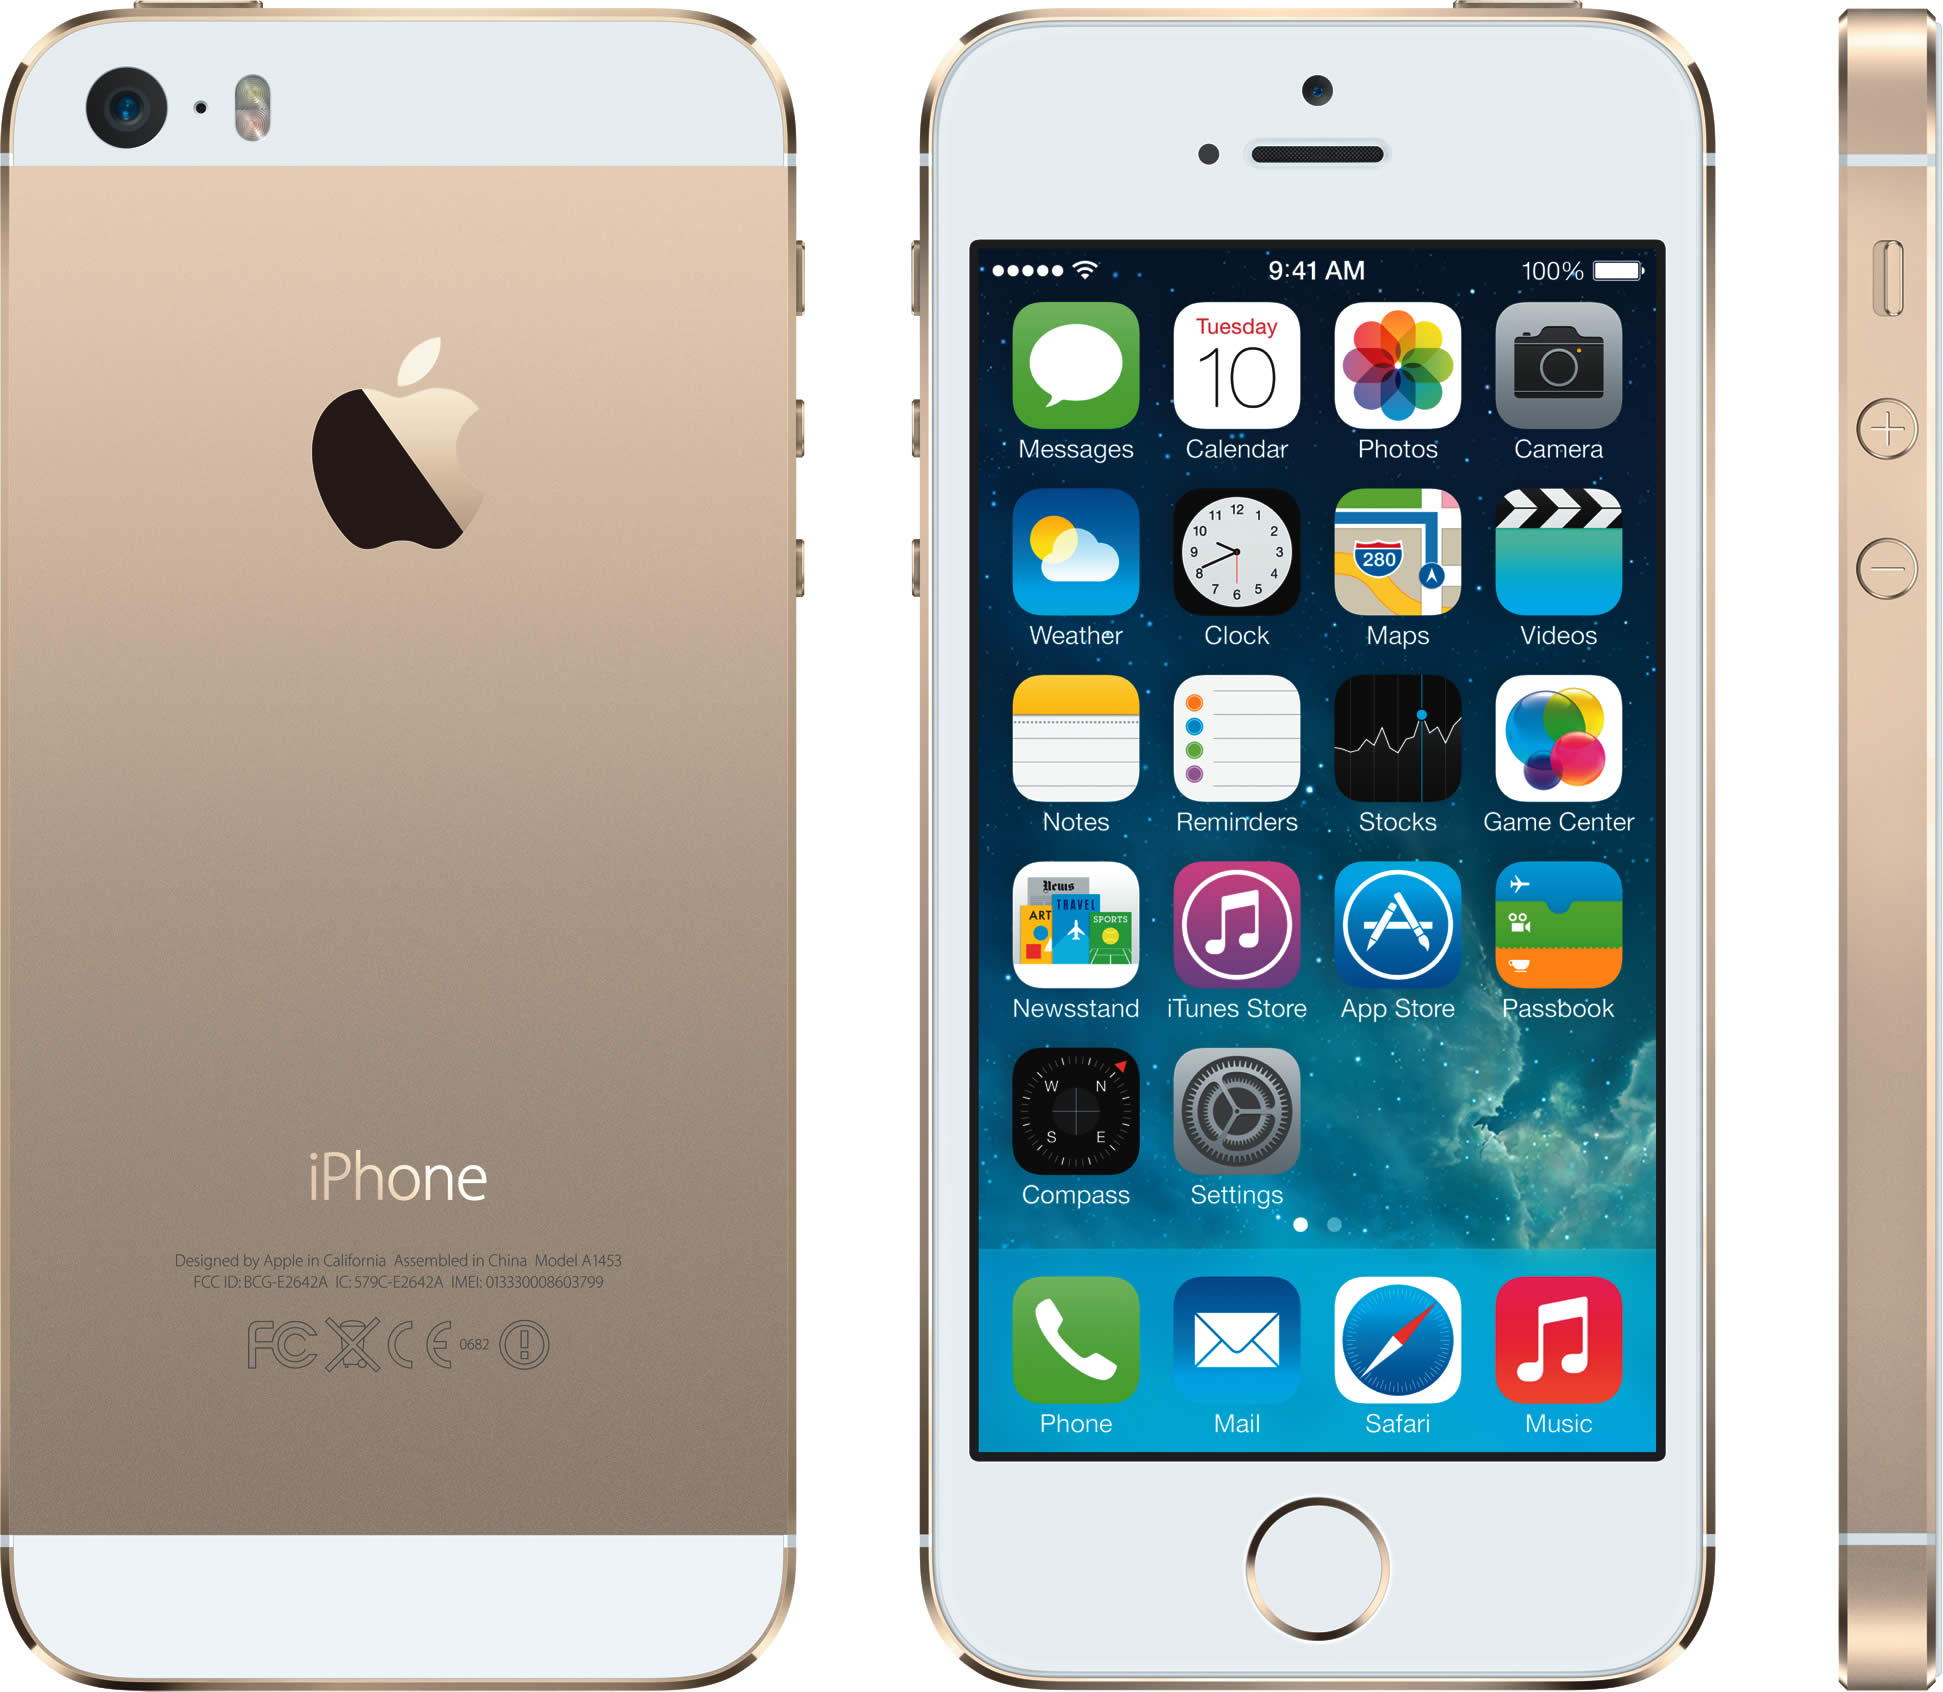 Featured image for Apple iPhone 5S Specifications, Photos & Singapore Availability 11 Sep 2013